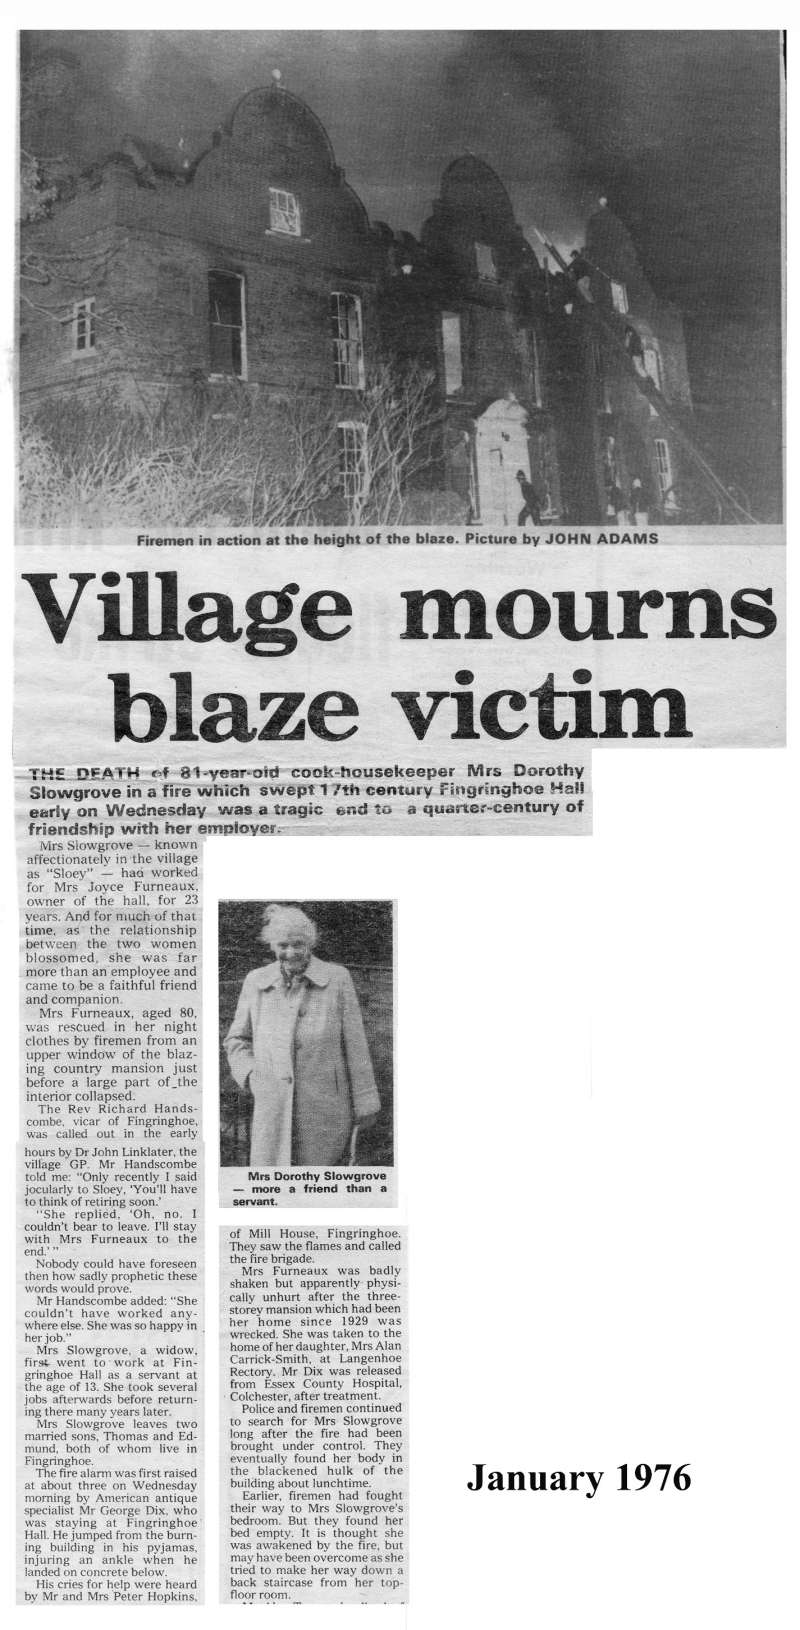  Village mourns blaze victim. 81-year old cook-housekeeper Mrs Dorothy Slowgrove was killed in a fire which swept 17th century Fingringhoe Hall. 
Cat1 Mersea-->Fire Brigade Cat2 People-->Other Cat3 Places-->Fingringhoe Cat4 Disasters and Mishaps-->on Land